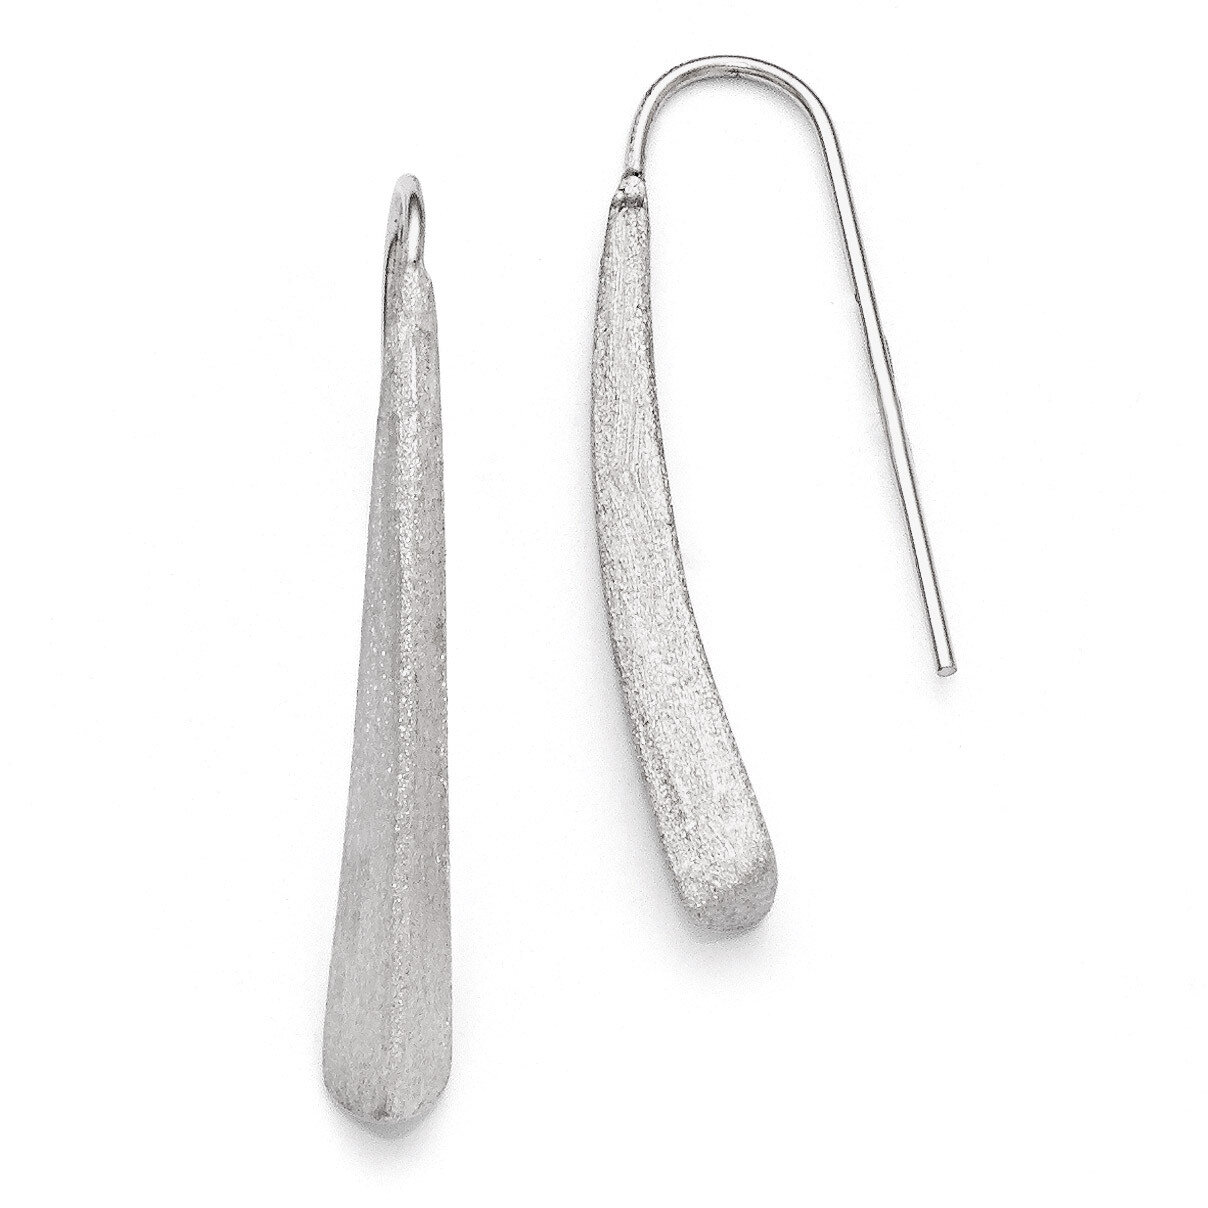 Polished and Brushed Earrings - Sterling Silver HB-QLE410